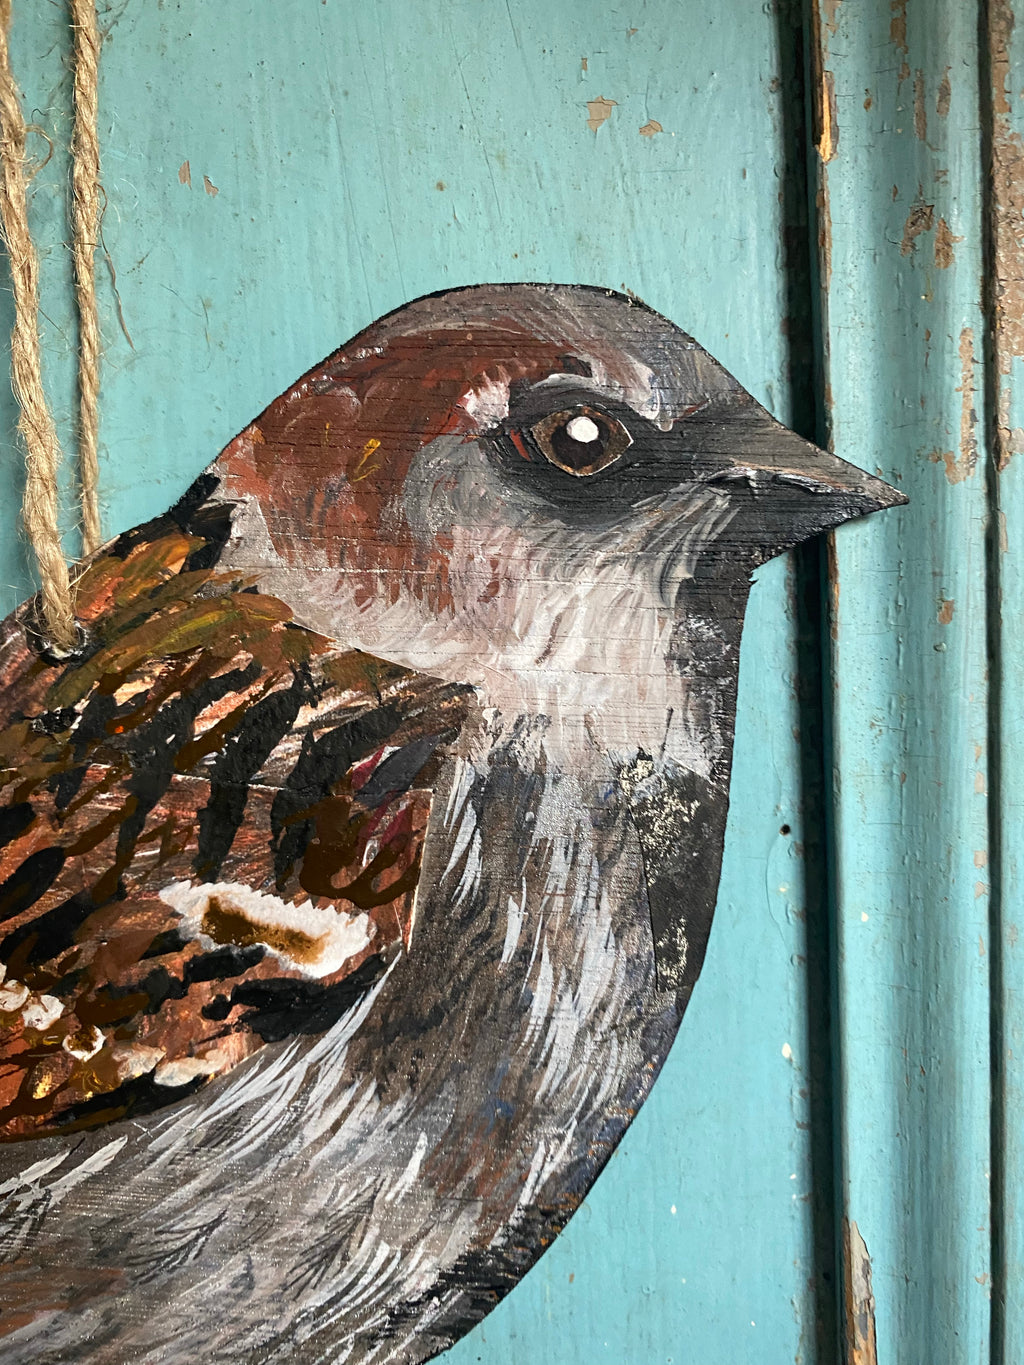 Hand painted wooden House sparrow